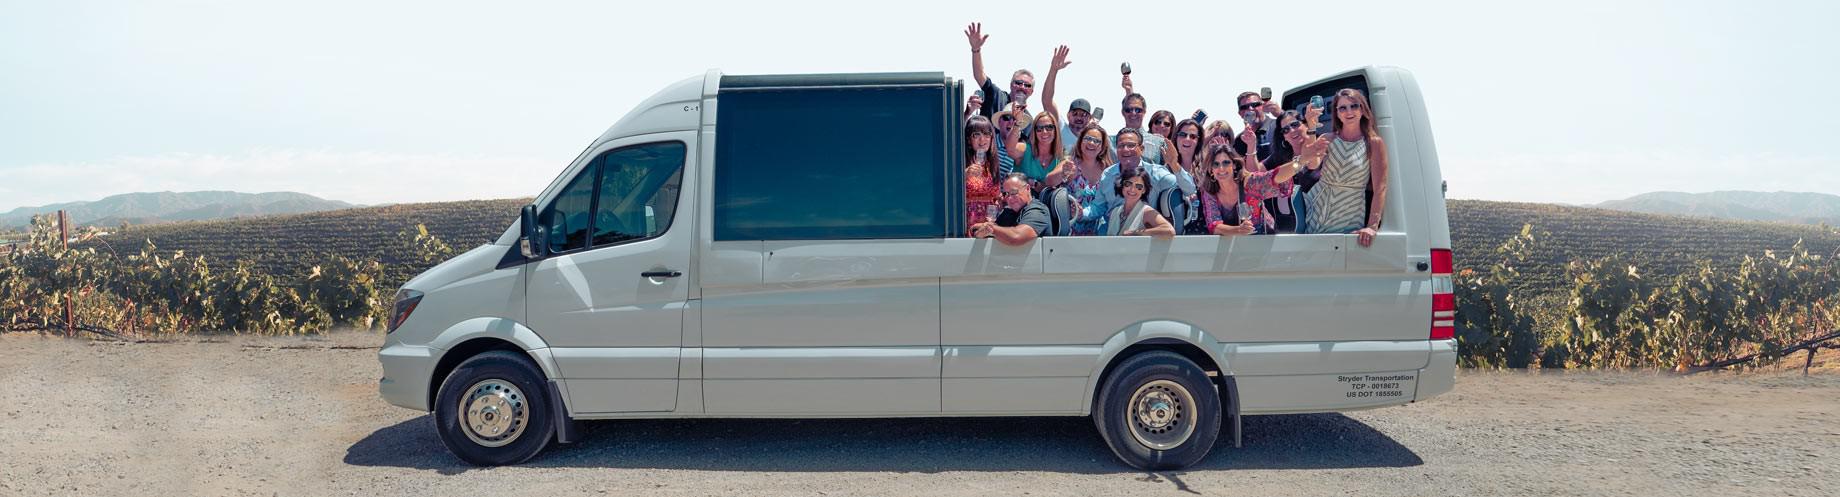 Guests pose for a photo with hands raised inside a convertible shuttle